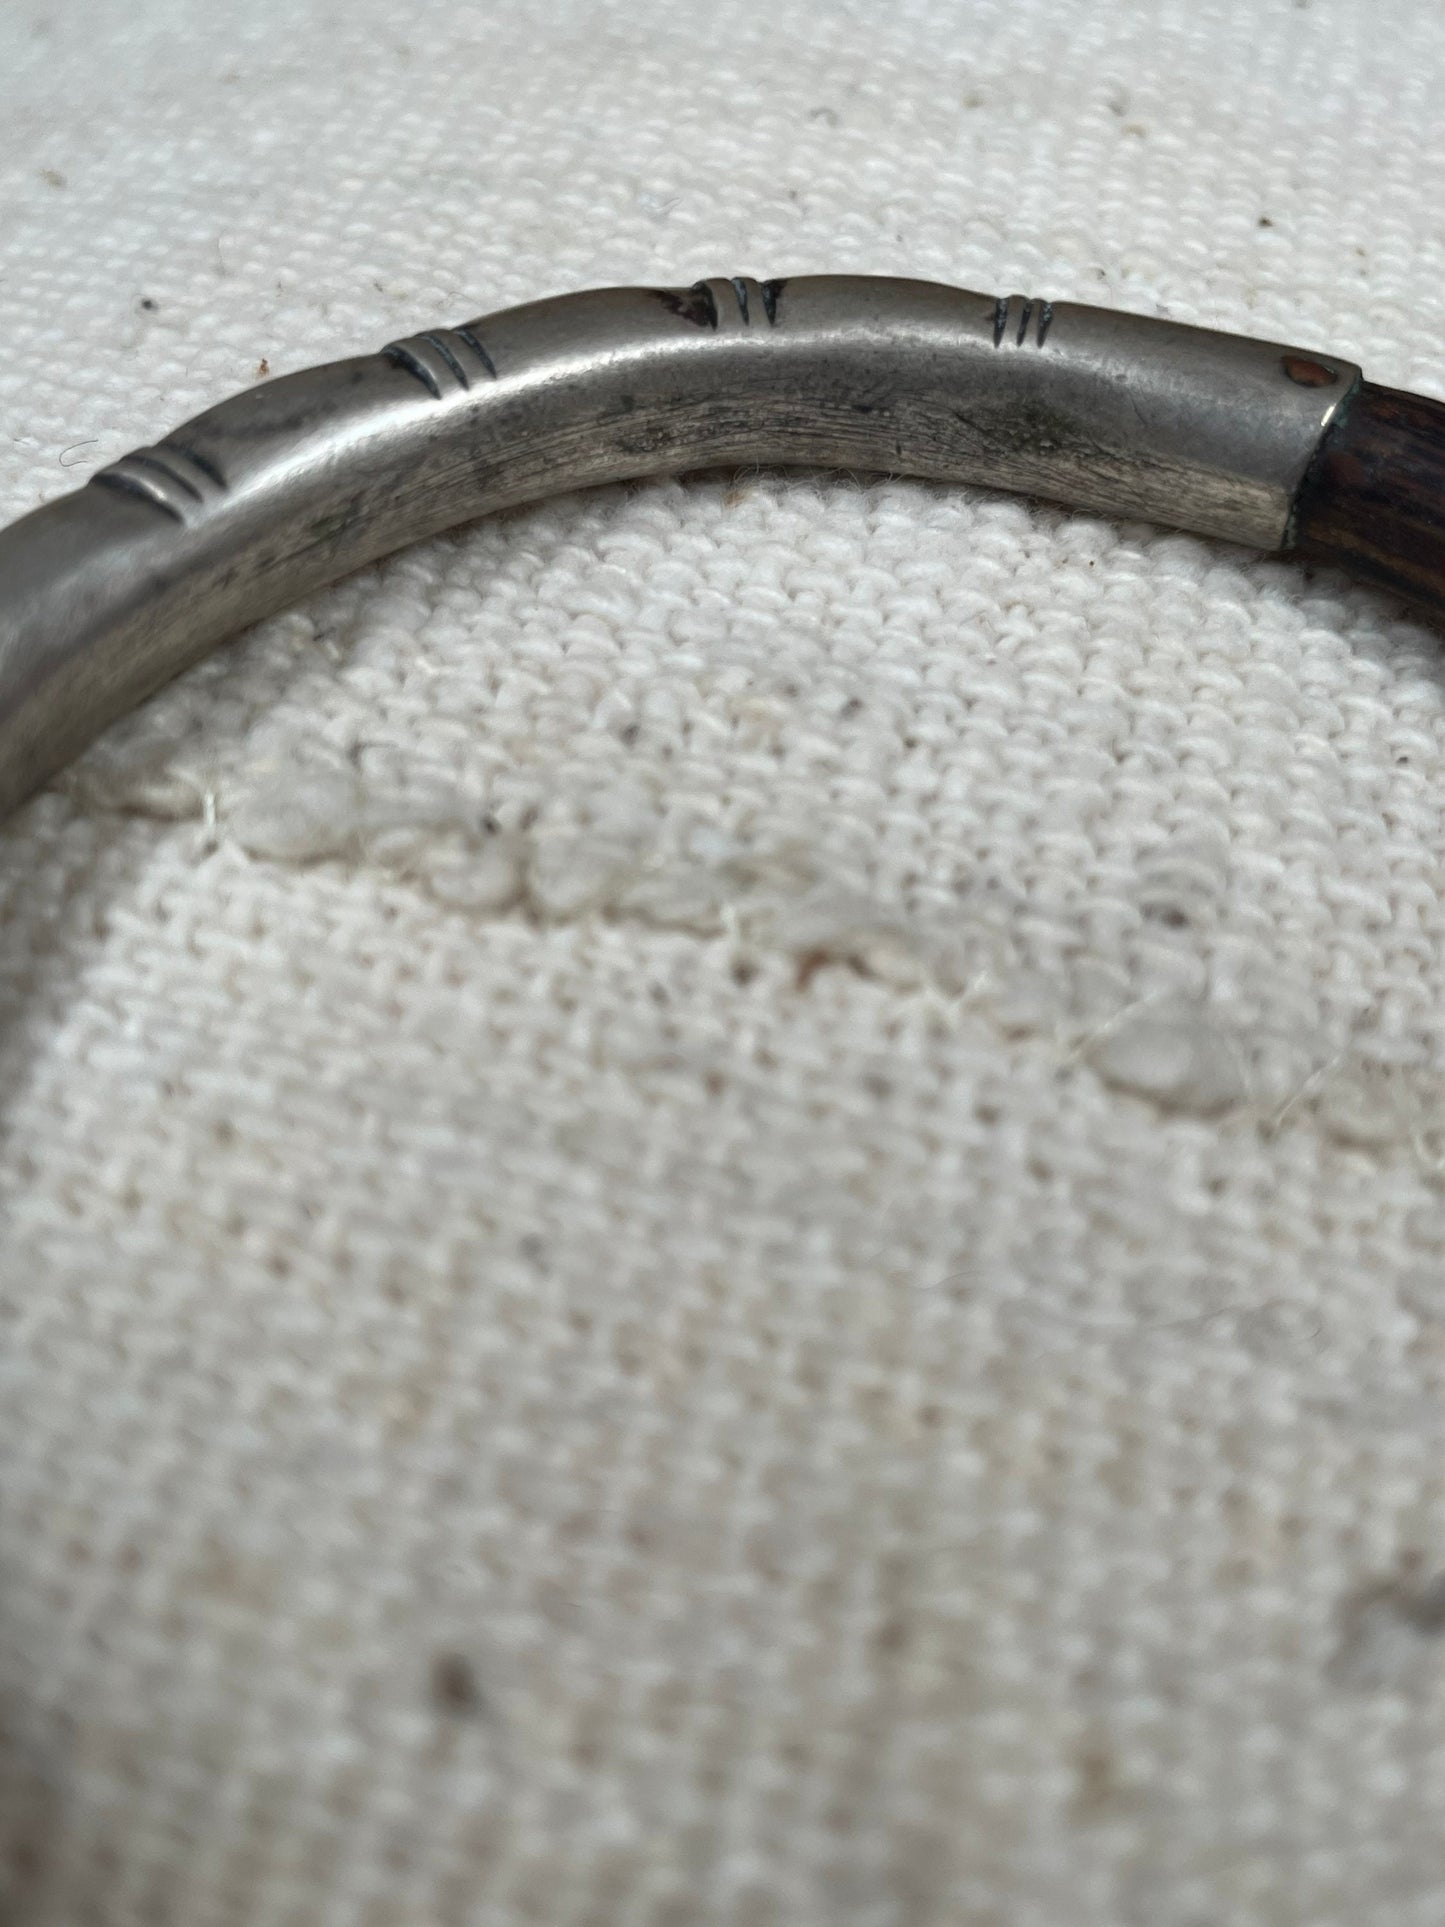 Vintage Chinese Silver and Bamboo Bangle